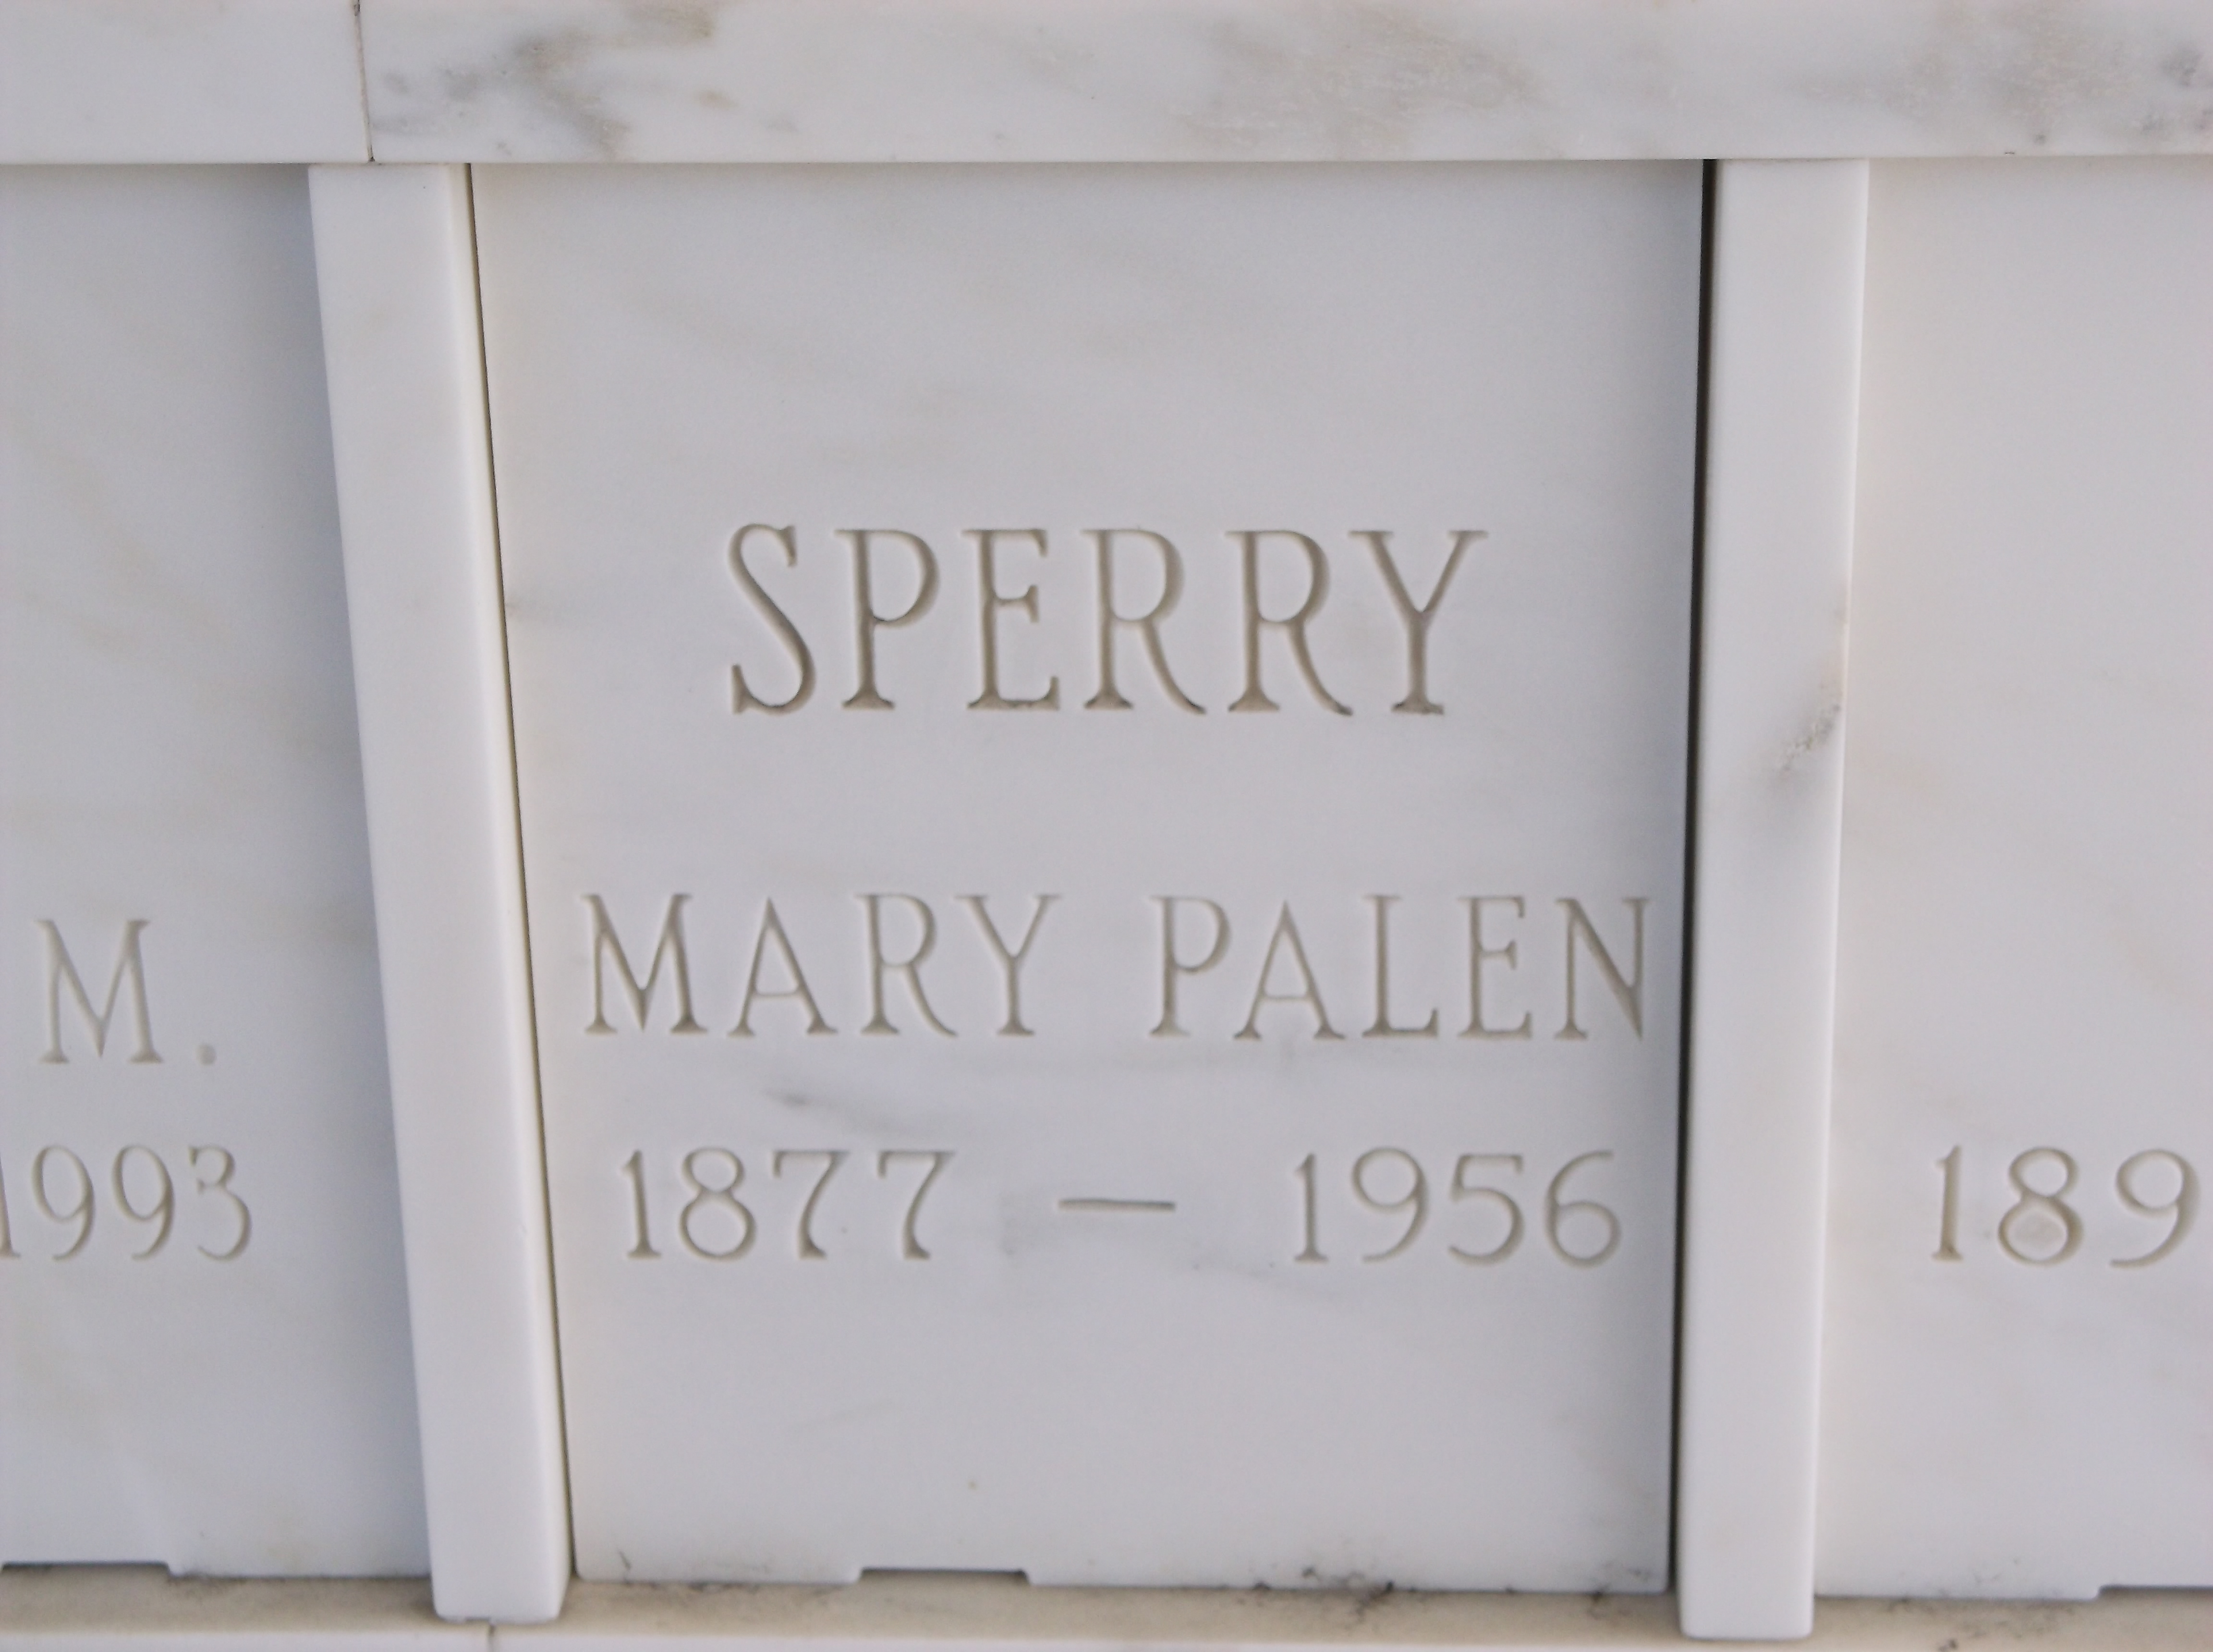 Mary Palen Sperry